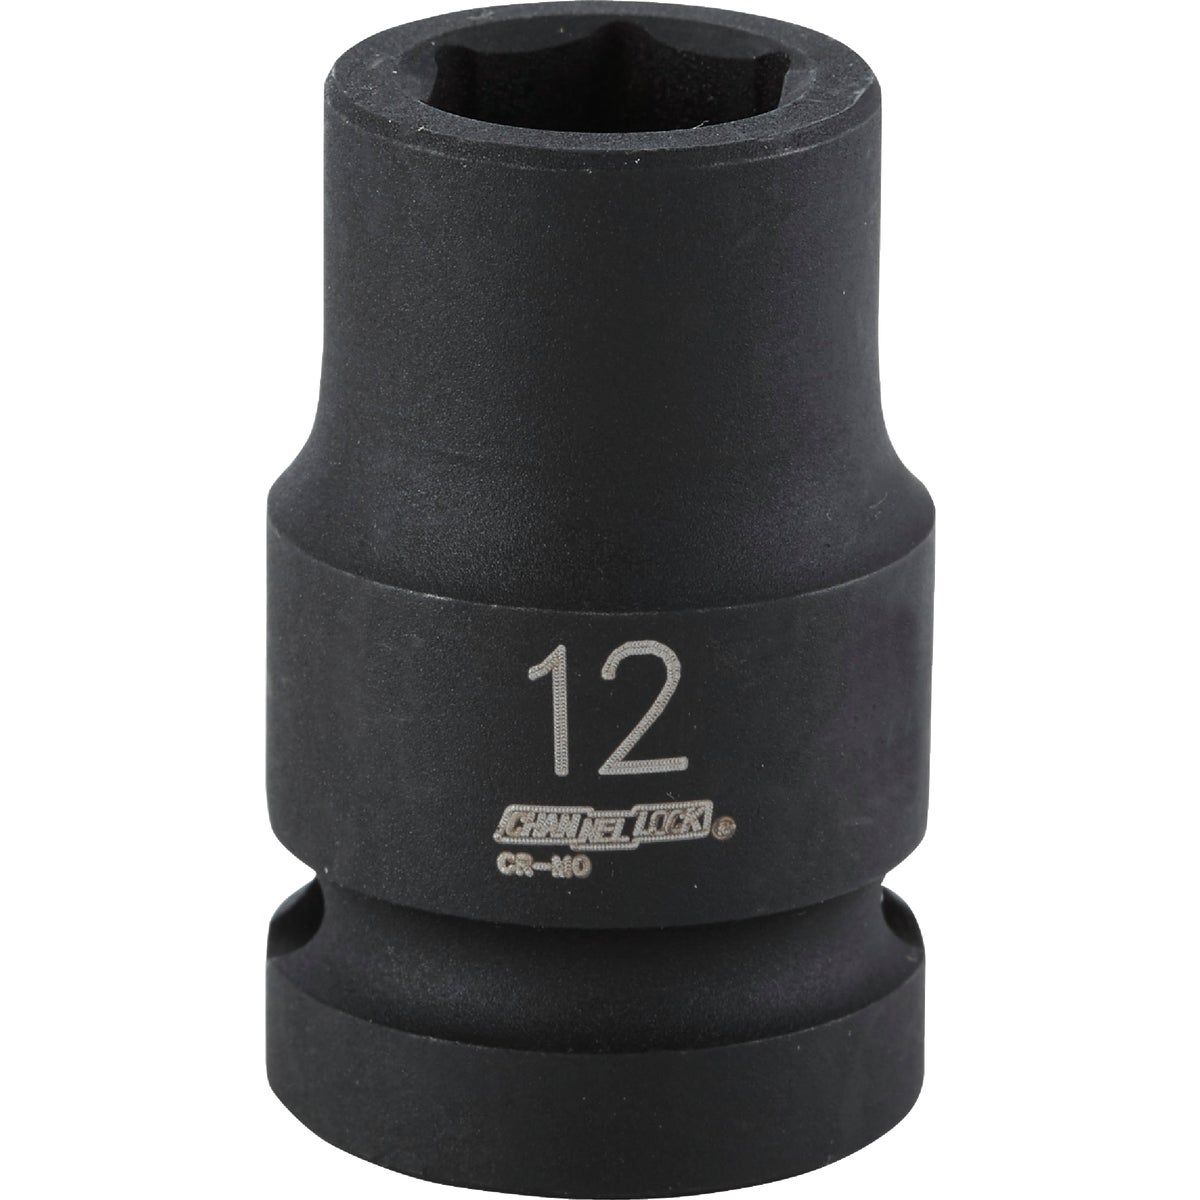 Channellock 1/2 In. Drive 12 mm 6-Point Shallow Metric Impact Socket